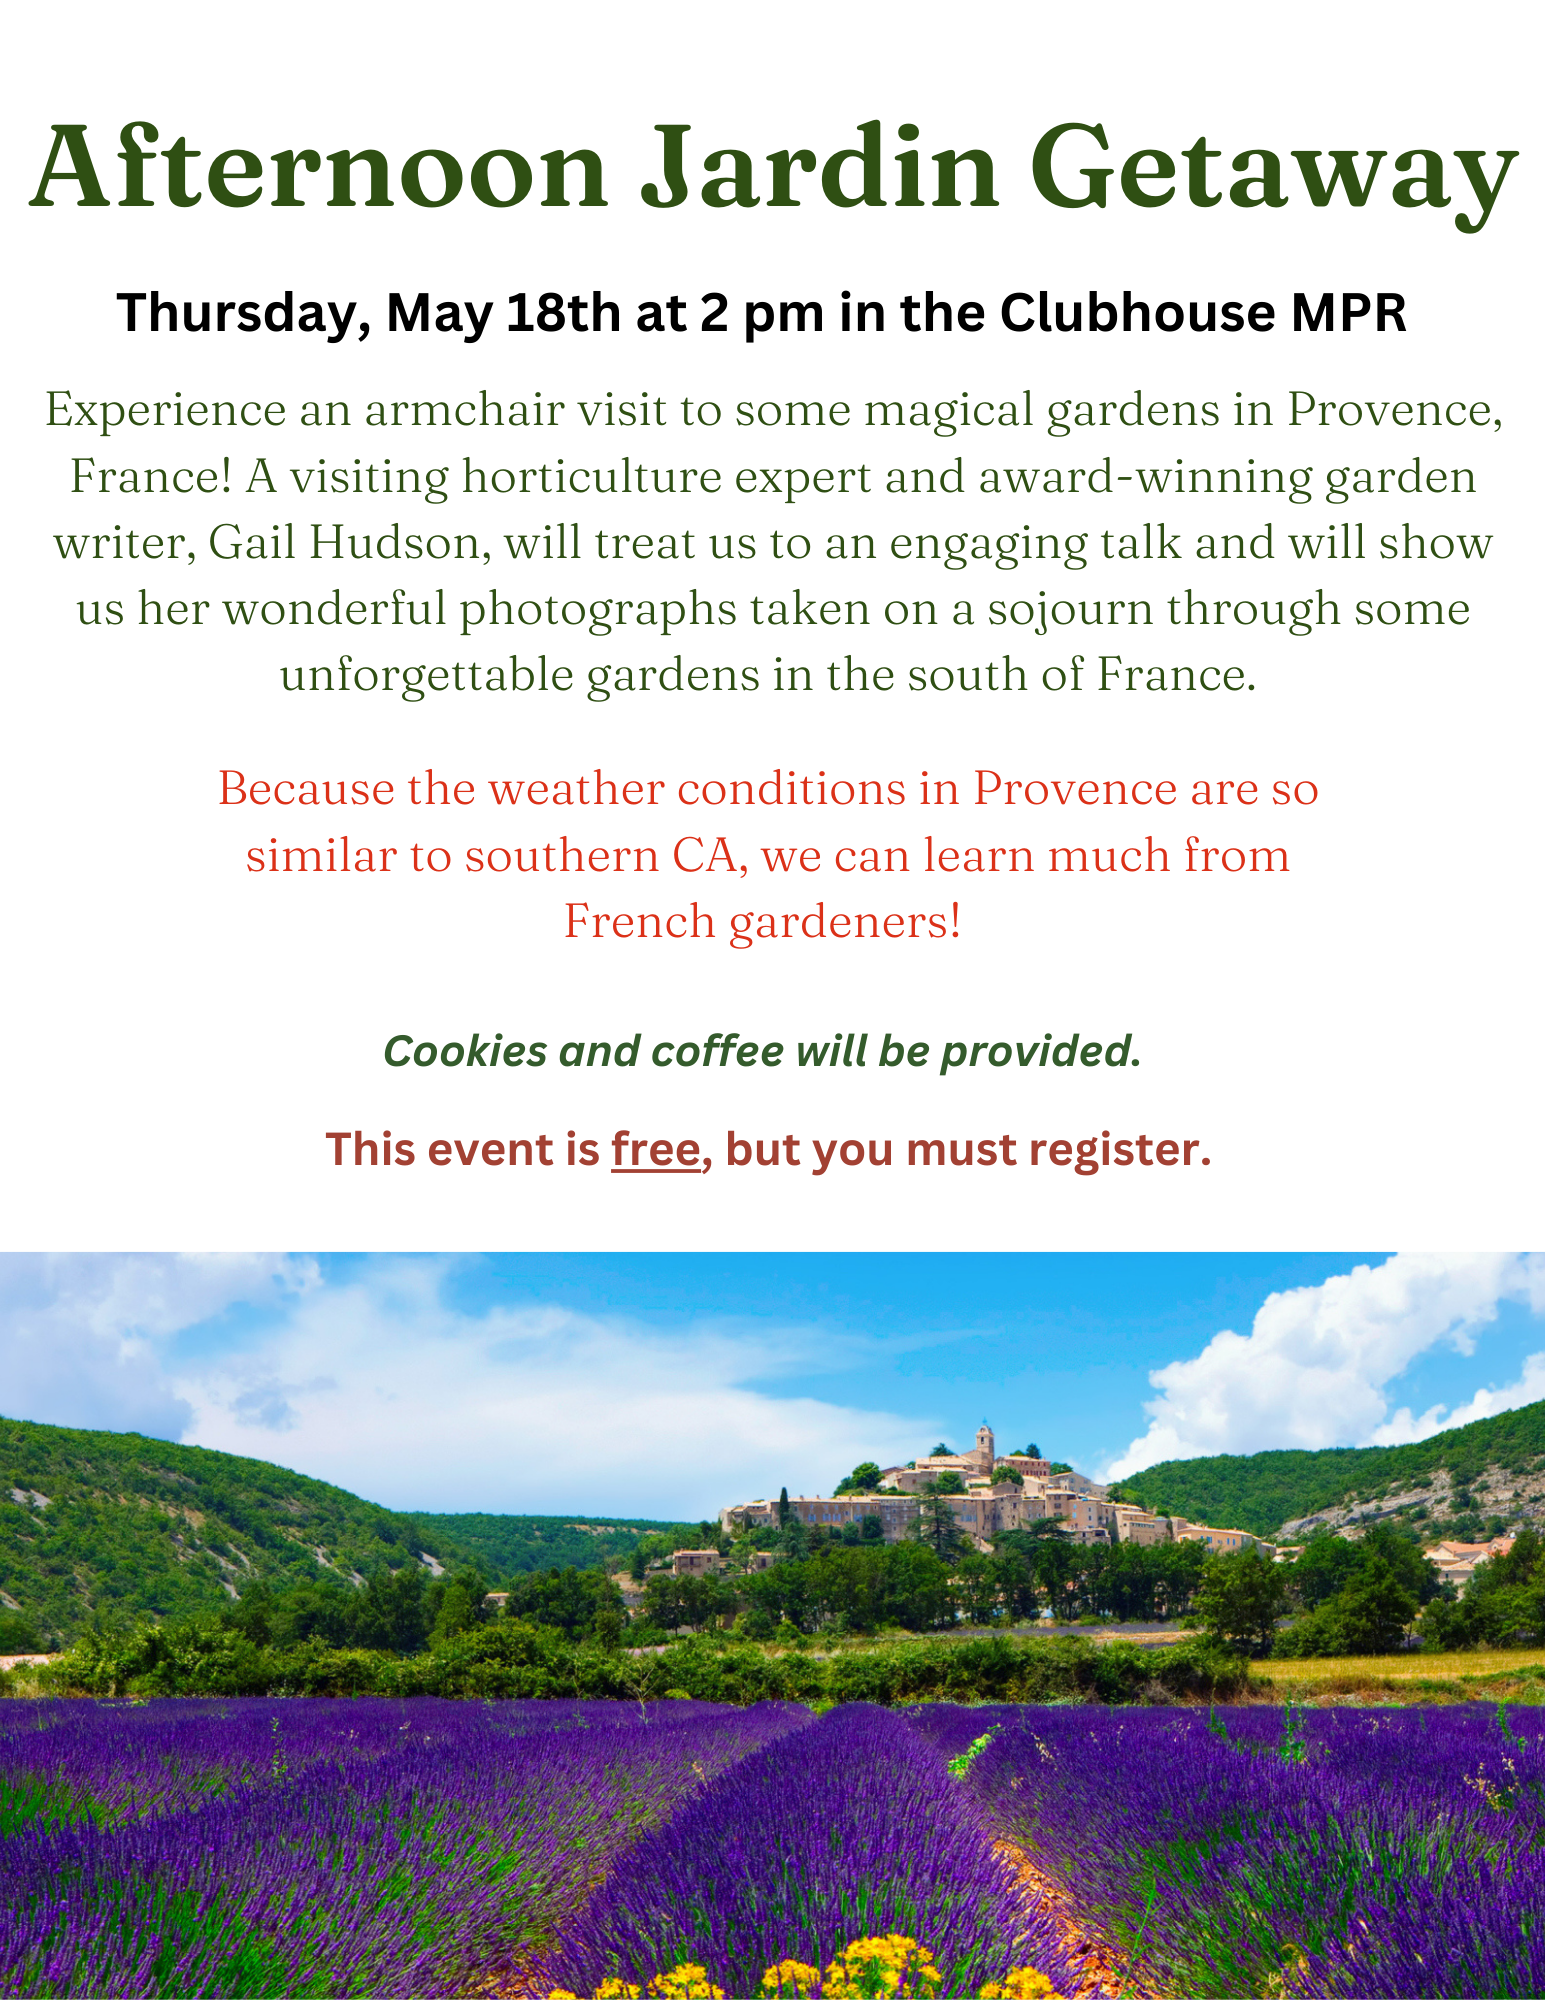 Gardens of Provence Flyer